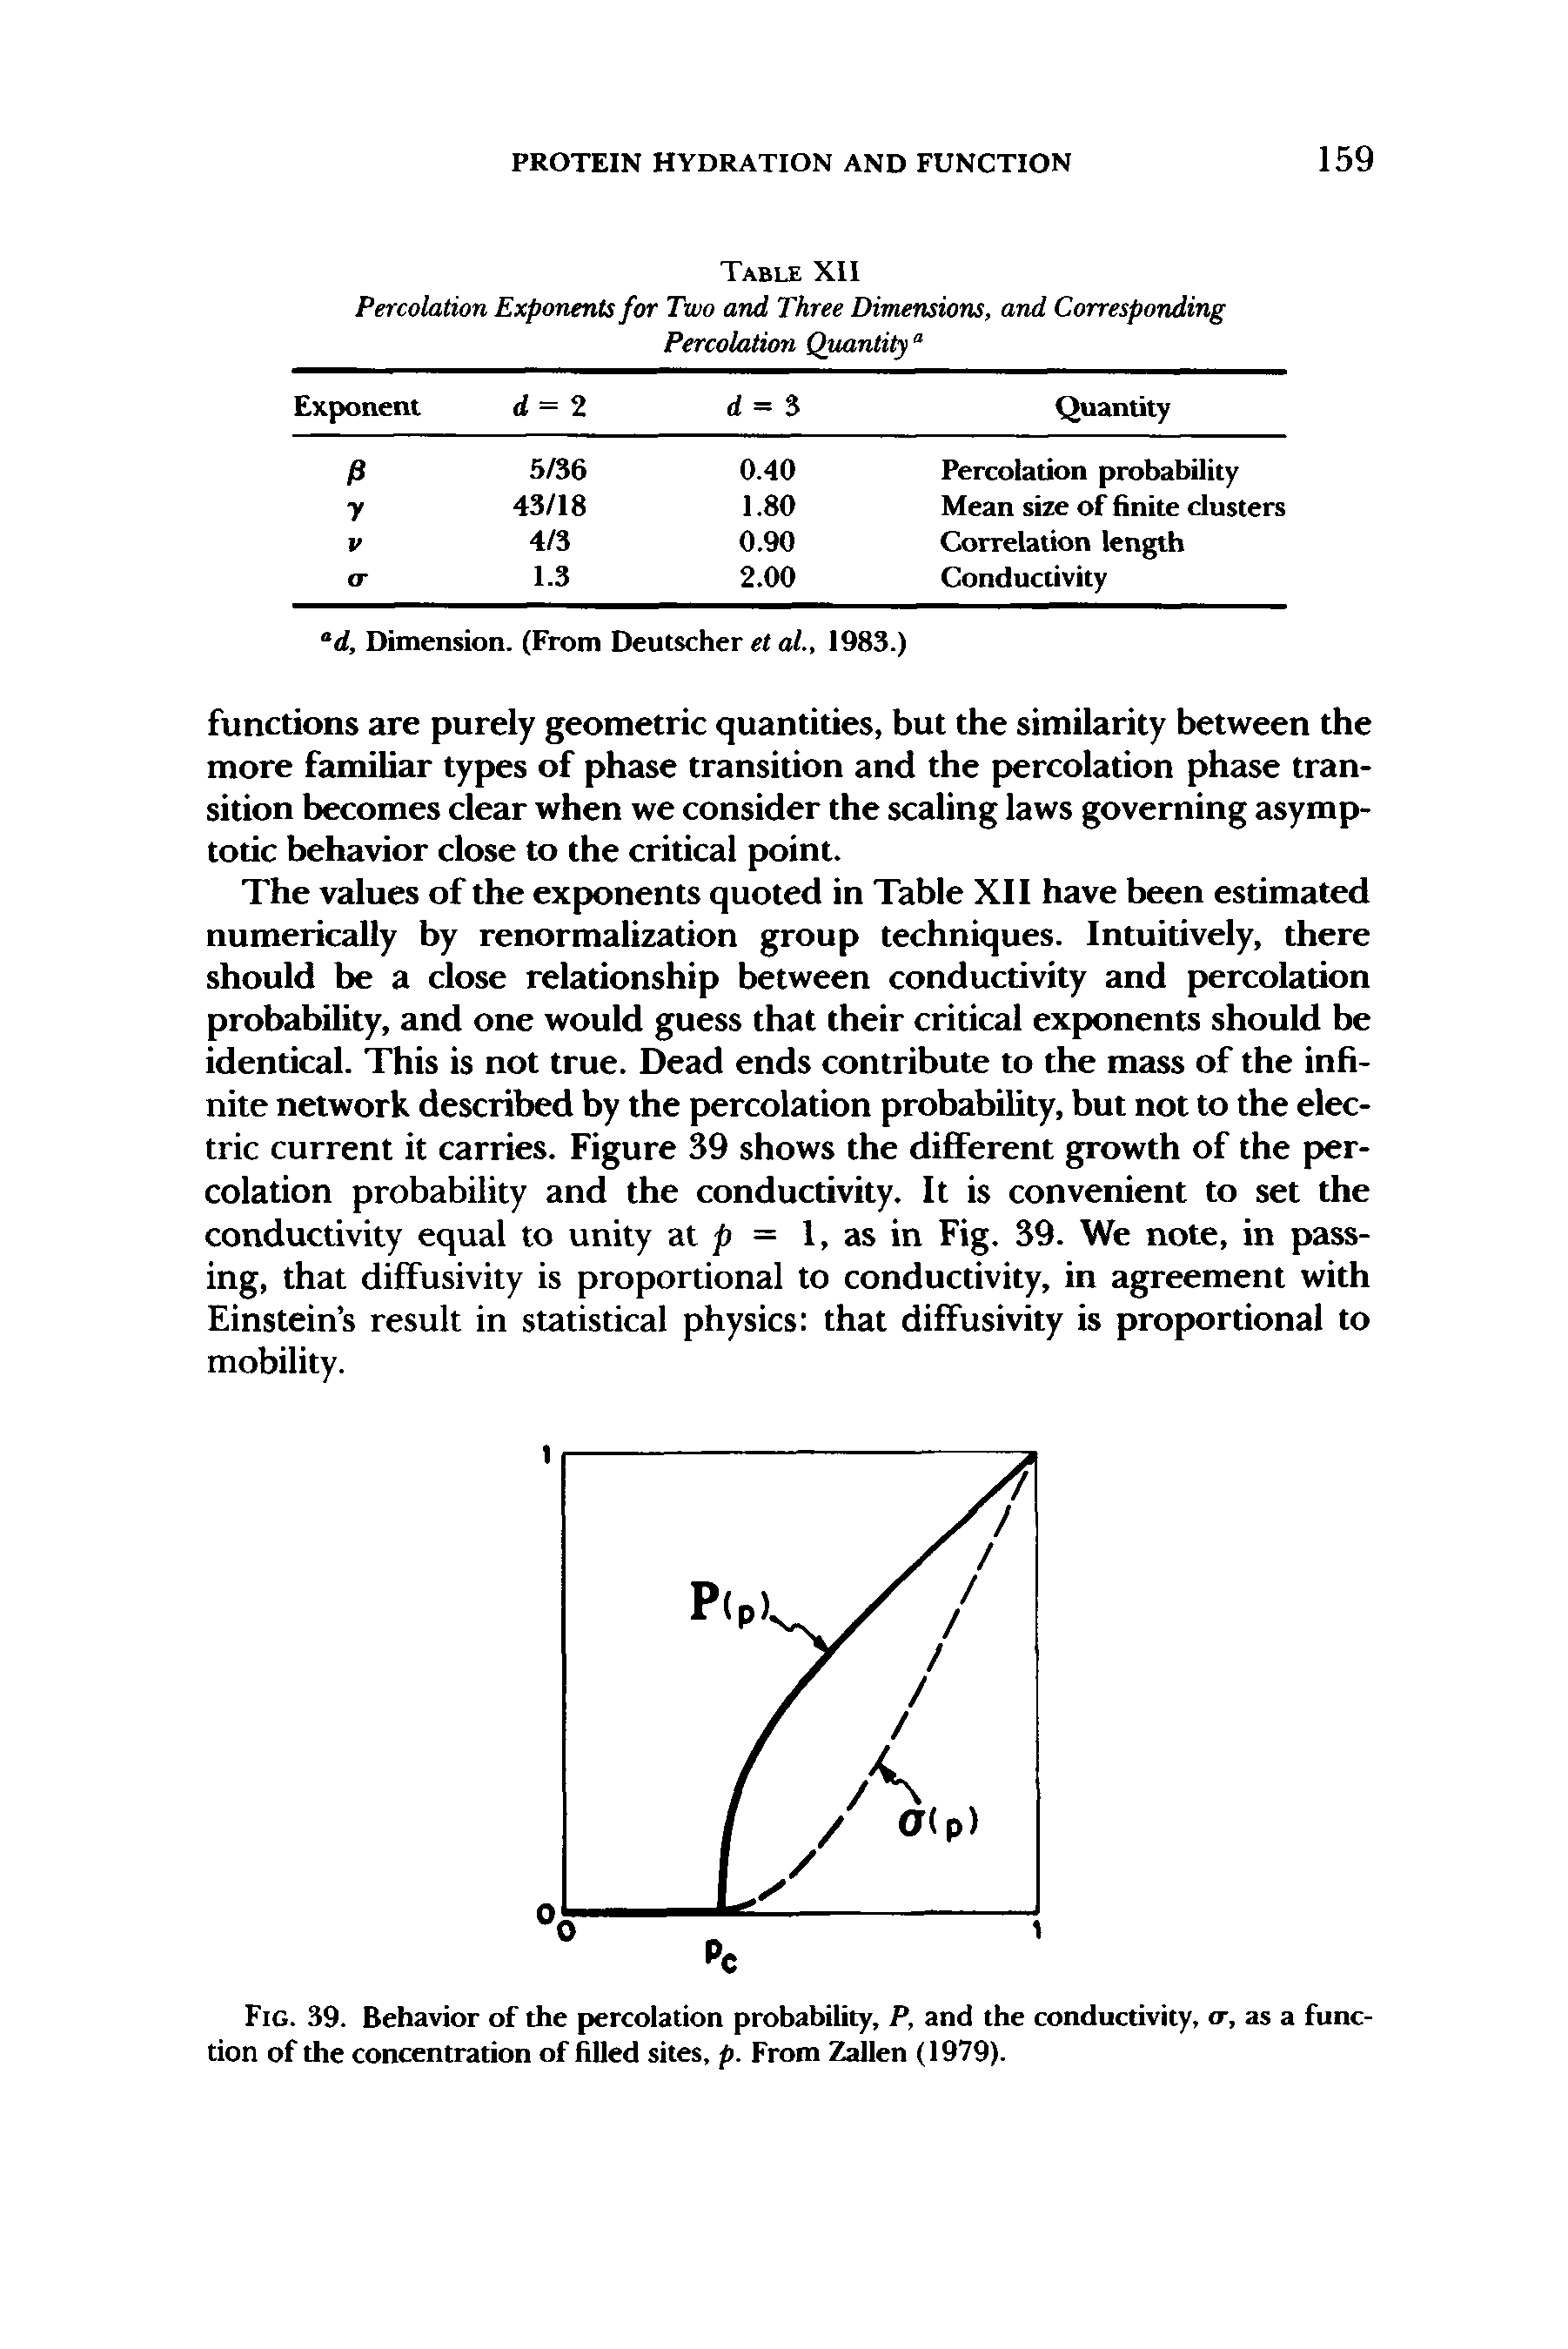 Fig. 39. Behavior of the percolation probability, P, and the conductivity, <r, as a function of the concentration of filled sites, p. From Zallen (1979).